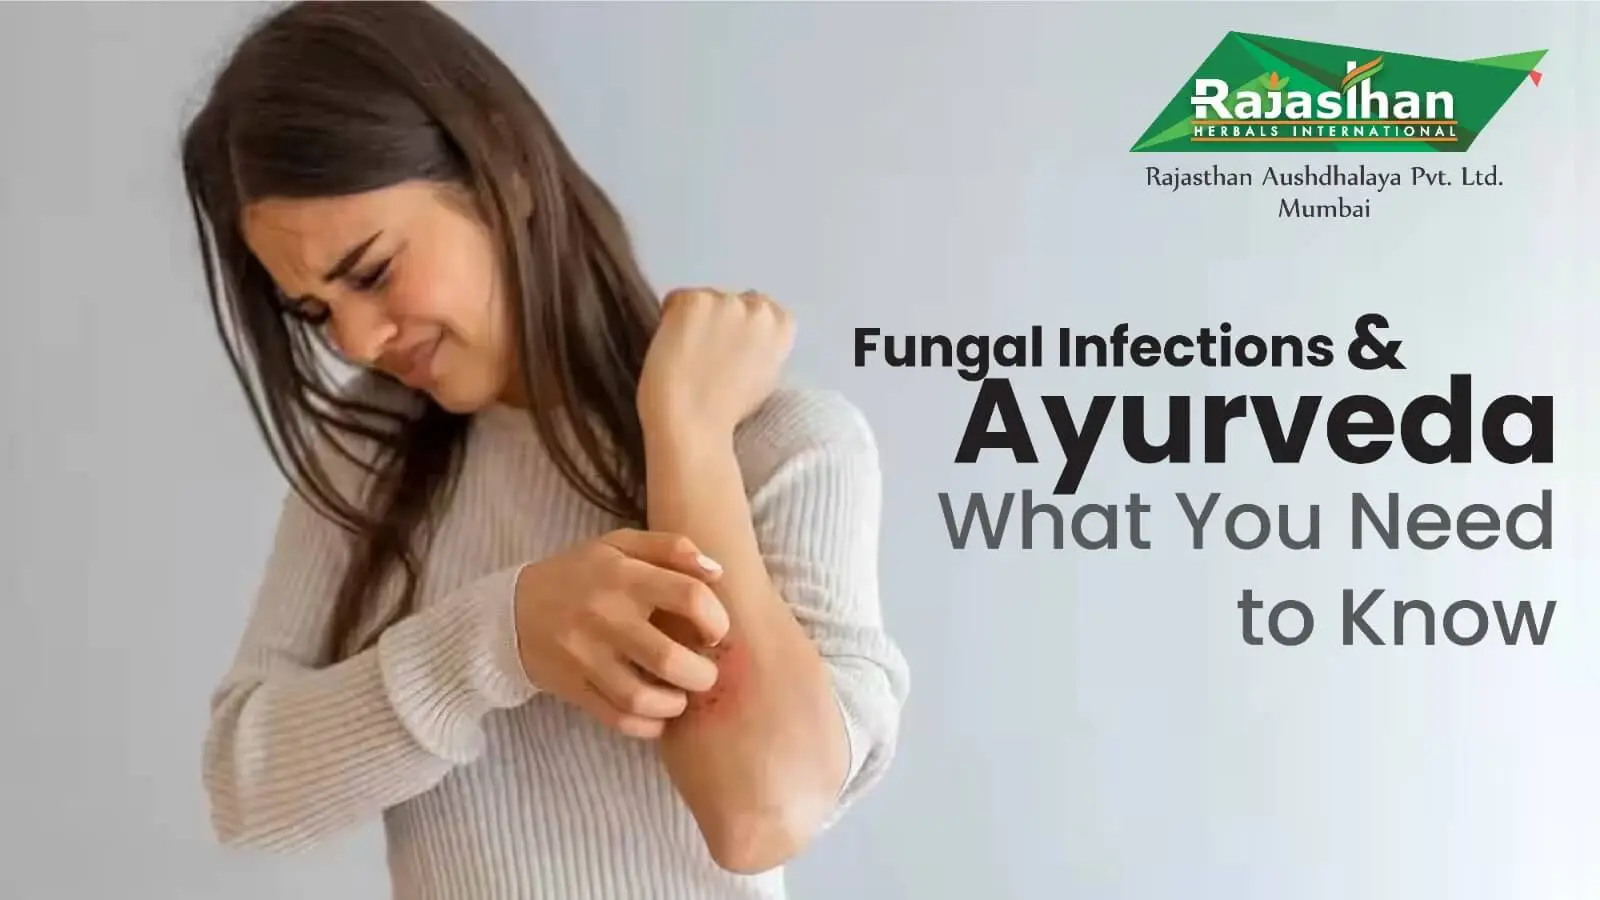 Fungal Infection In Nails - 11 Ways It Can Be Managed! - By Dr. Niraj  Goenka | Lybrate